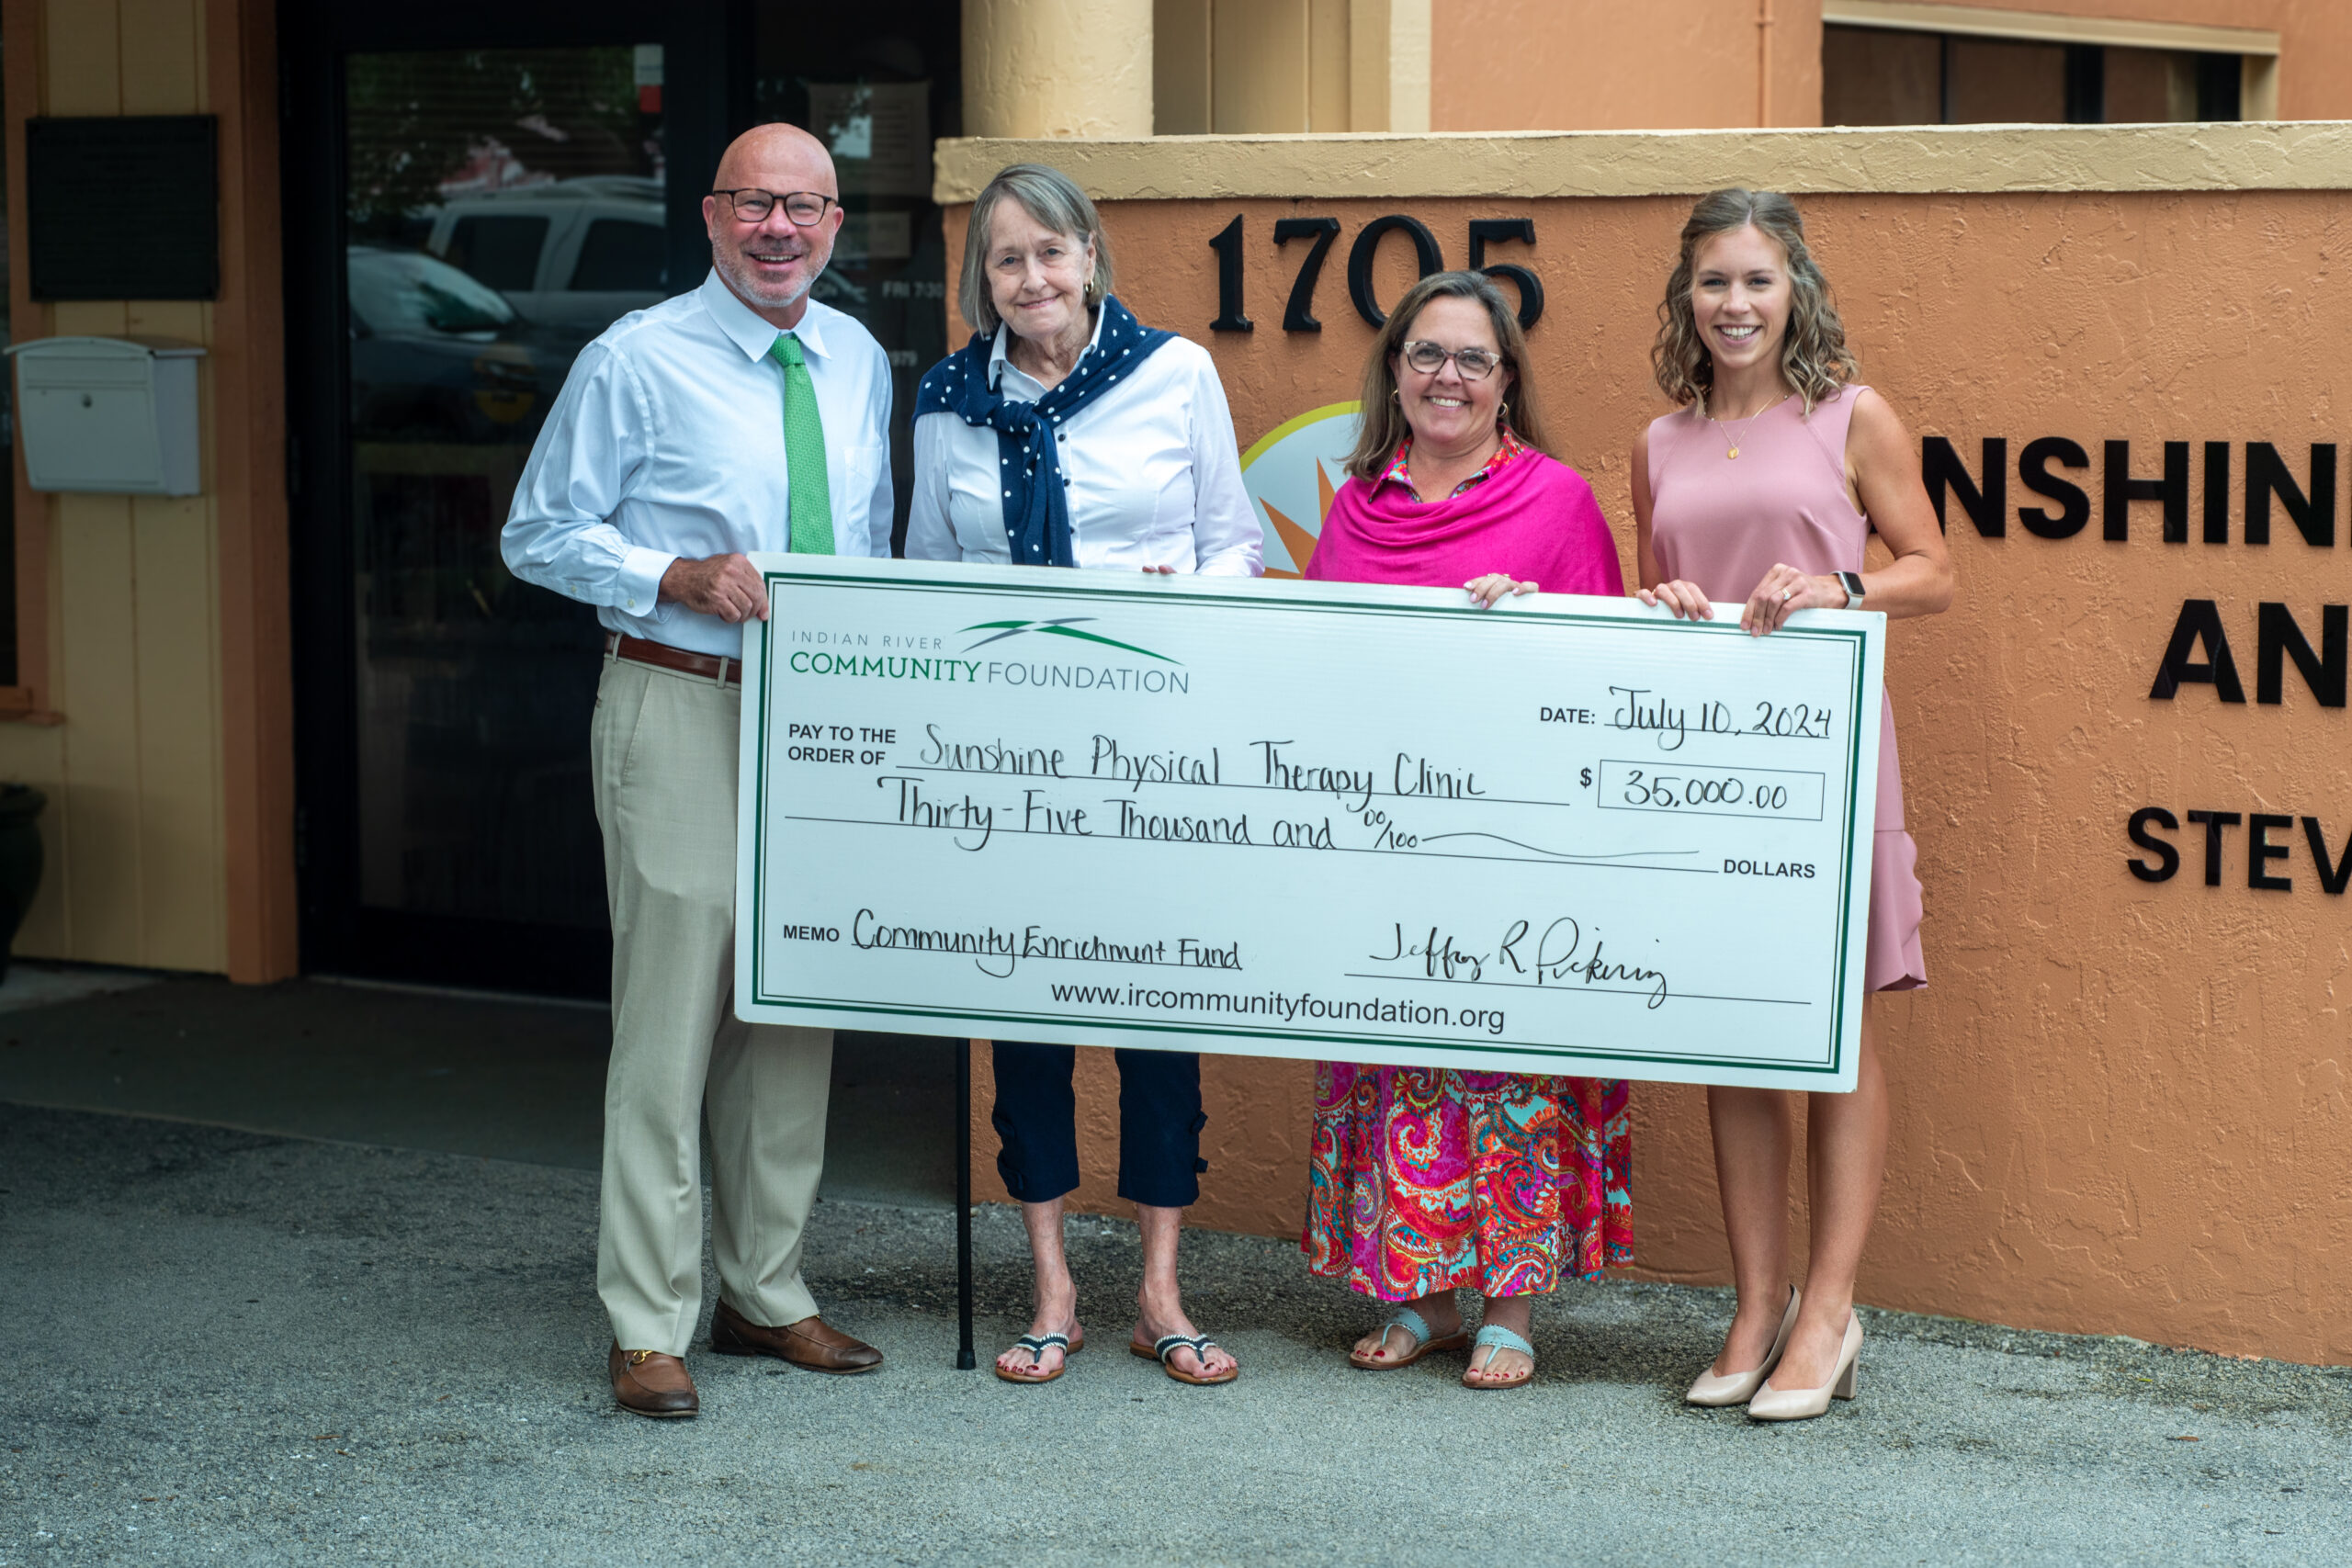 IRCF Awards Sunshine Physical Therapy Clinic $35,000